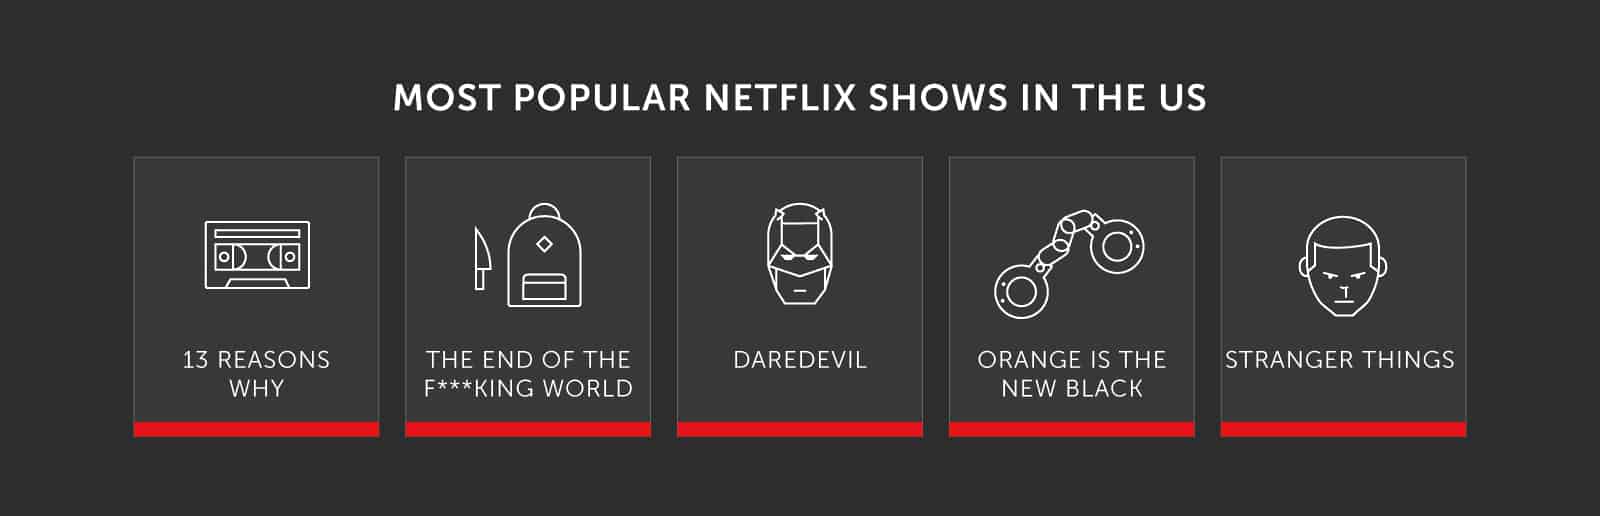 HSI most popular Netflix shows in 2018